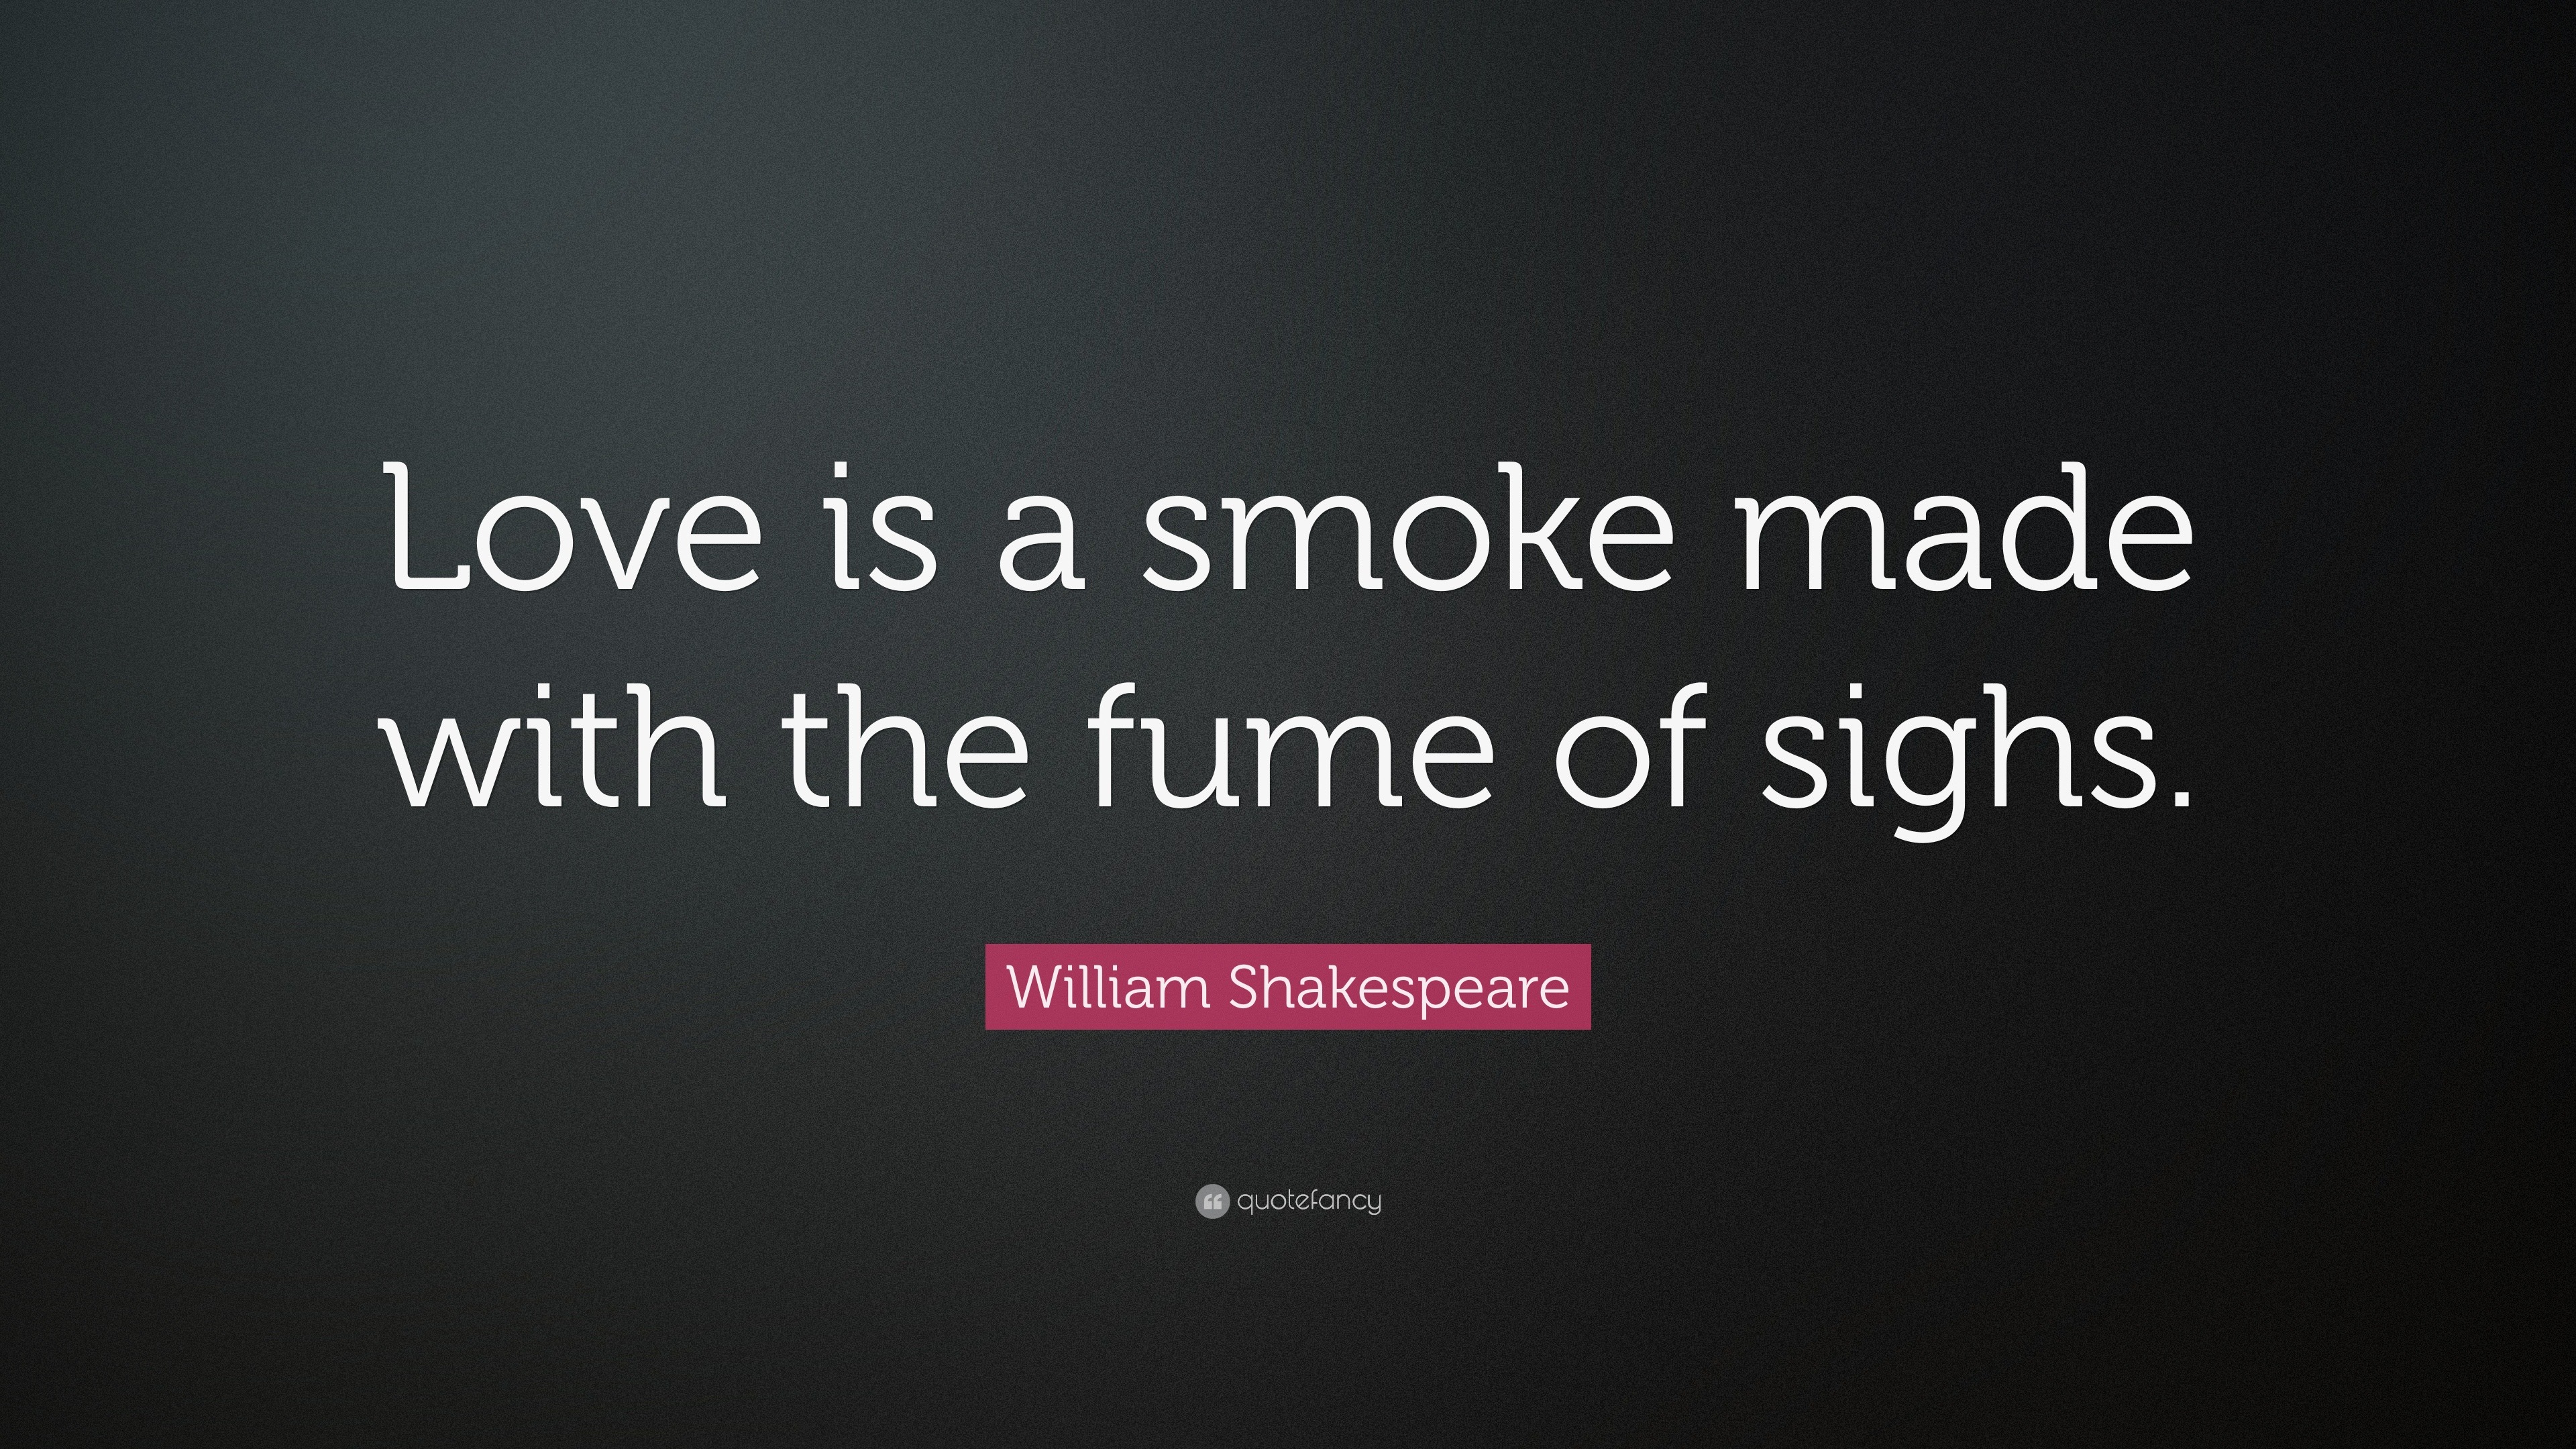 William Shakespeare Quote “Love is a smoke made with the fume of sighs